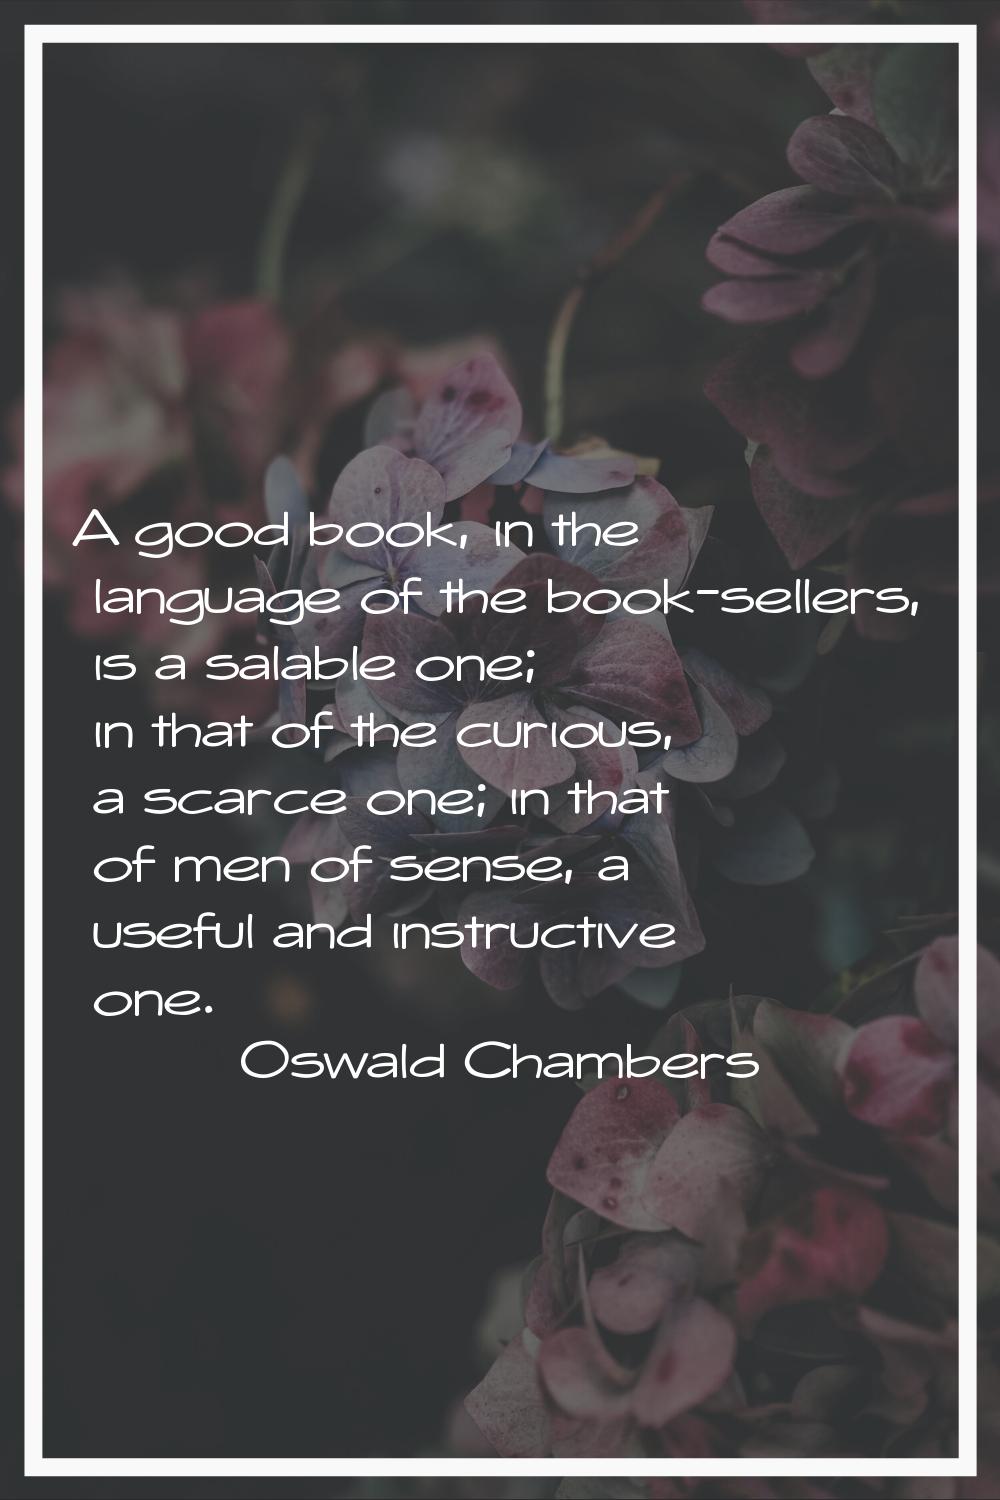 A good book, in the language of the book-sellers, is a salable one; in that of the curious, a scarc